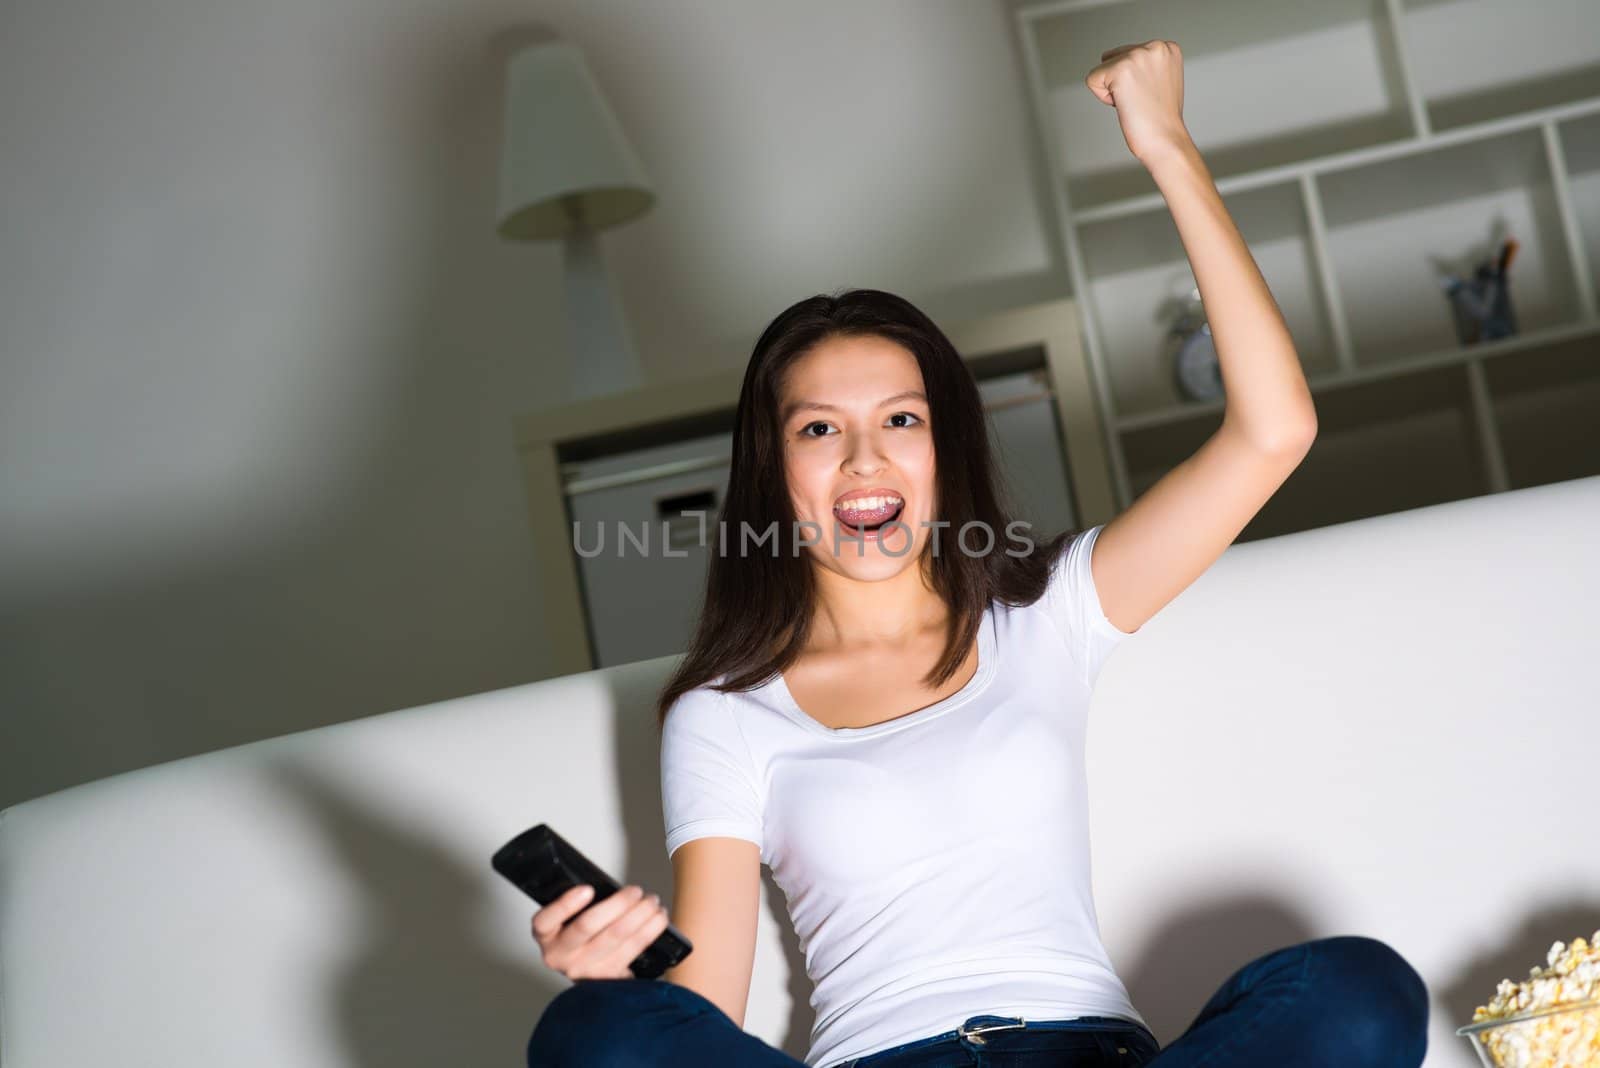 Asian young girl with excitement at night watching TV in the living room